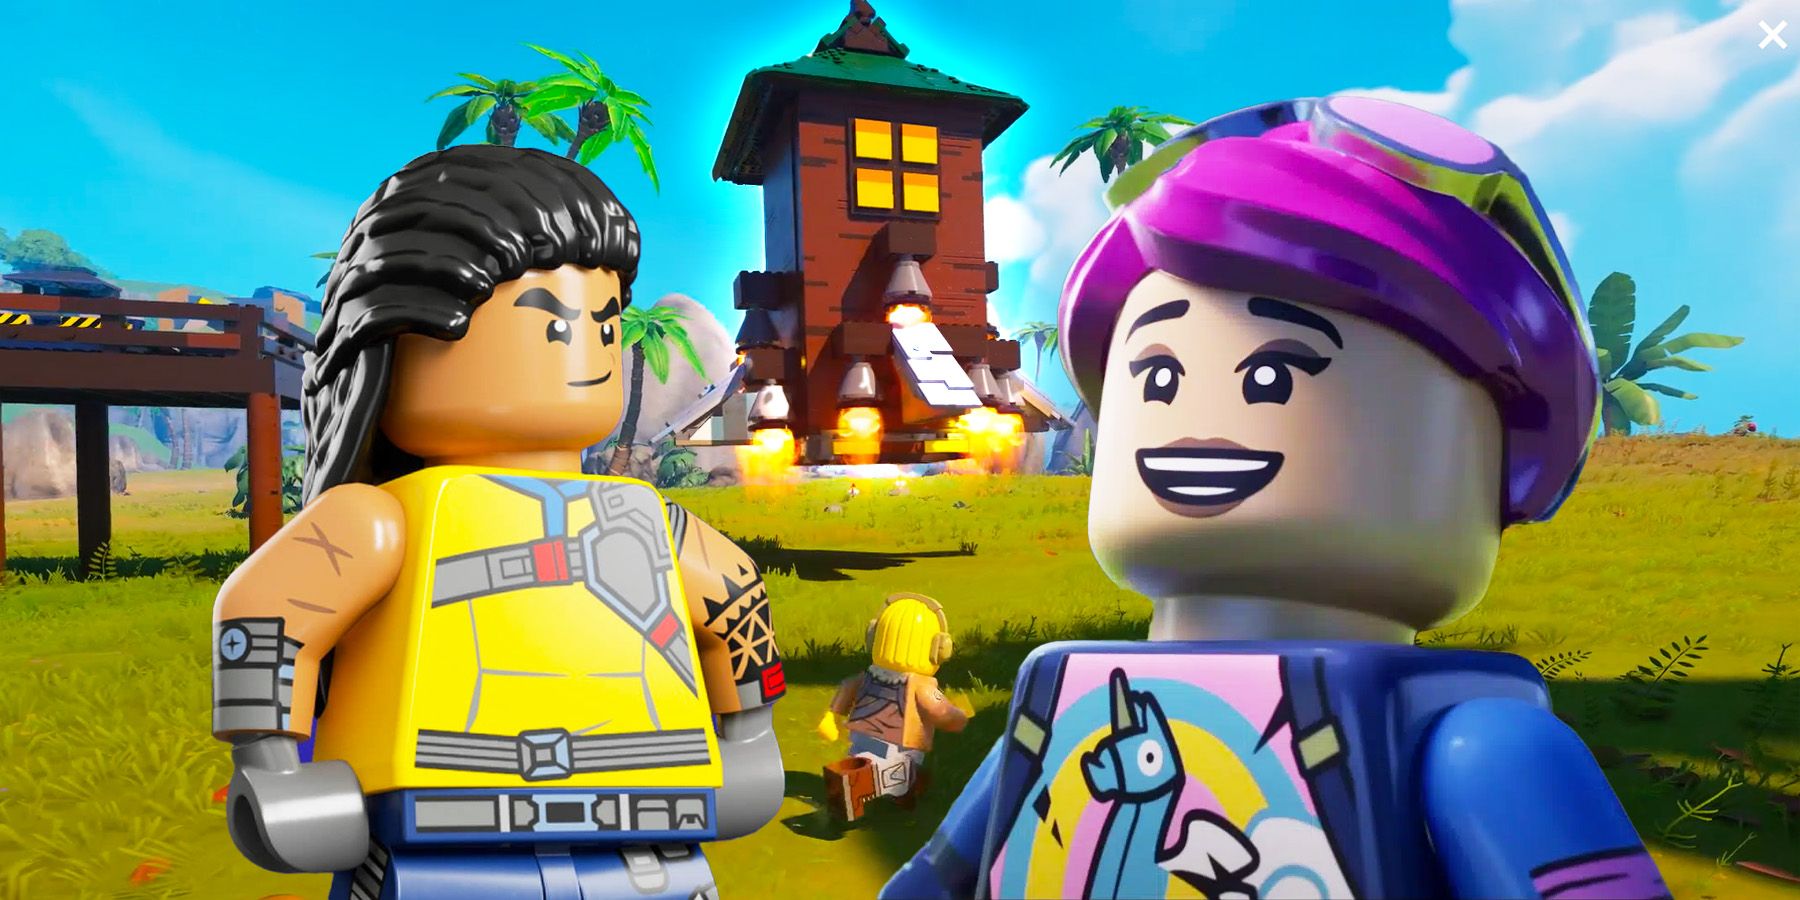 Two player outfits in Lego form in front of a custom Rocket Ship in Lego Fortnite.